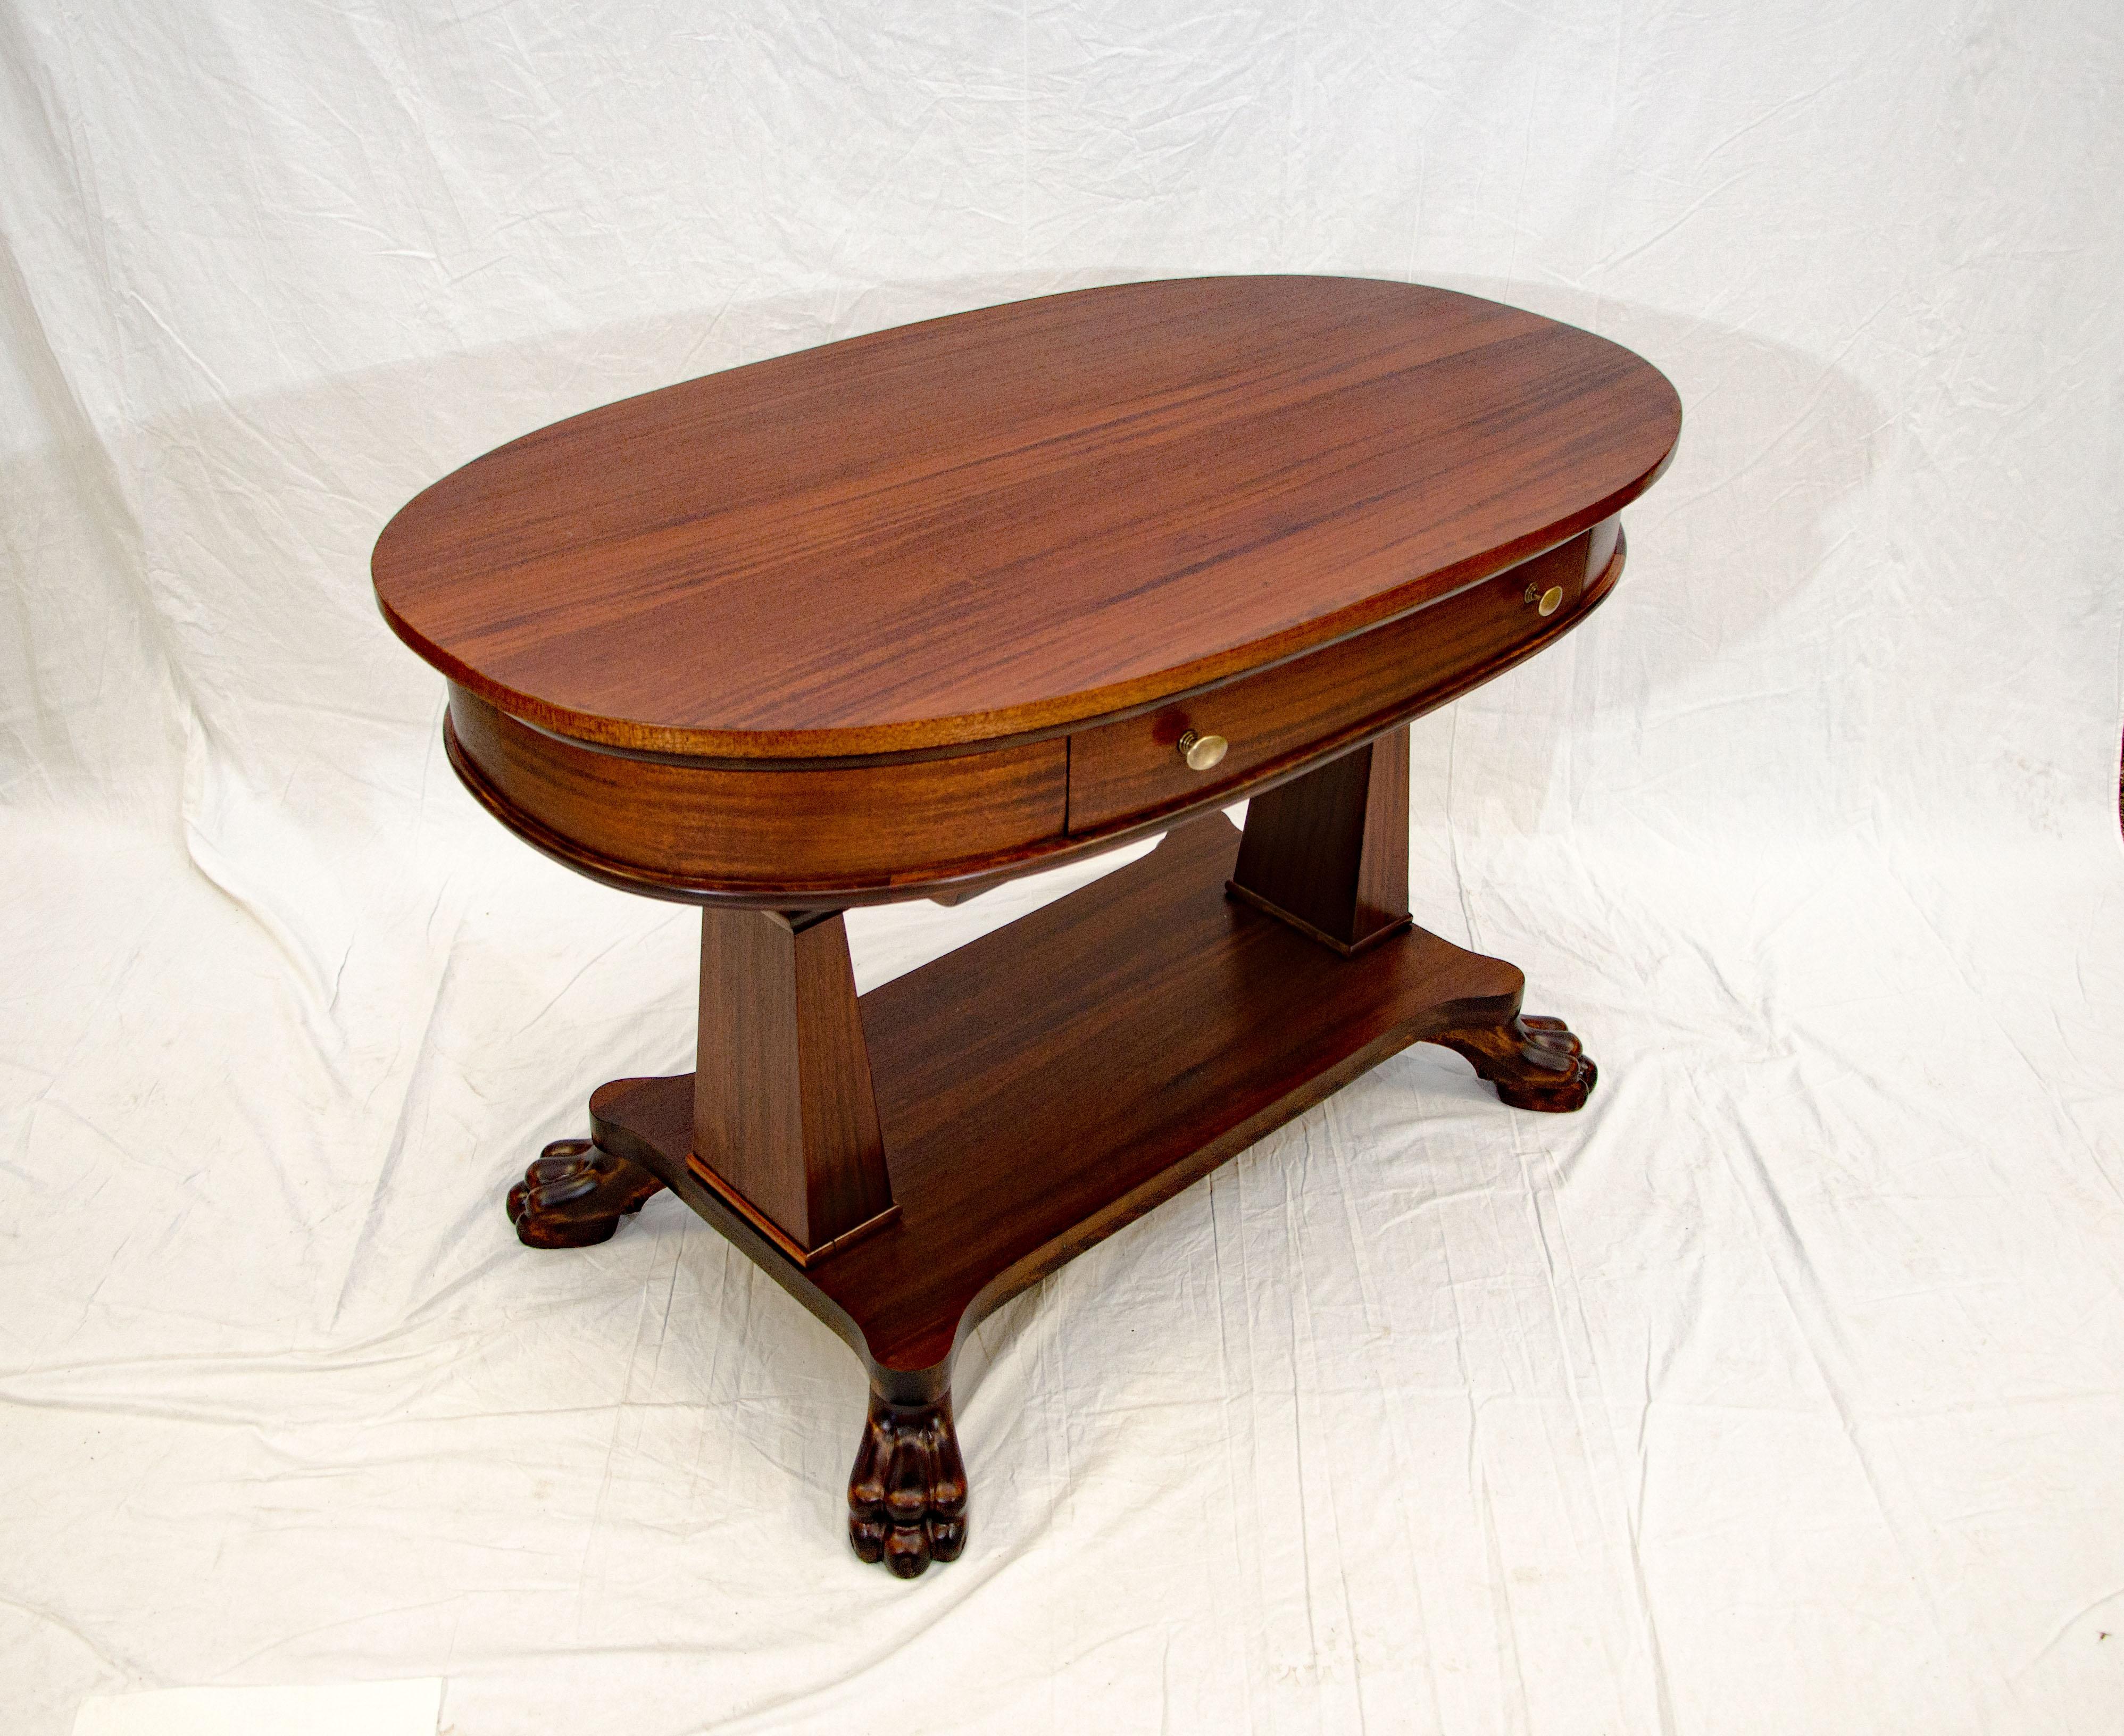 Well designed Victorian mahogany oval library table with brass knobs on the drawer and nicely carved claw feet. A great entryway or occasional table. There is an 18 1/2